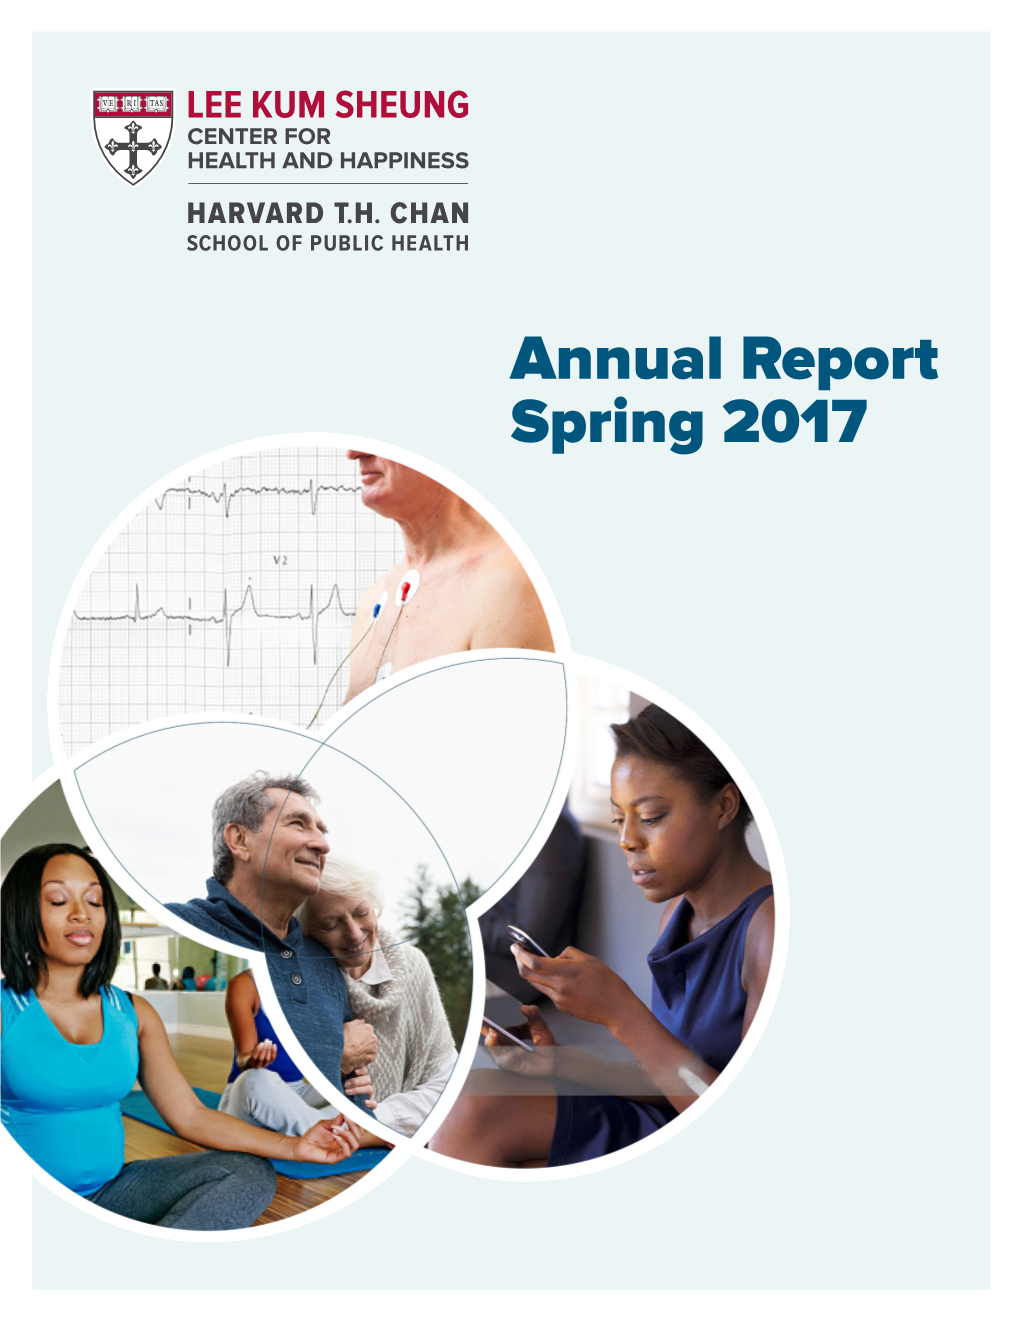 Annual Report Spring 2017